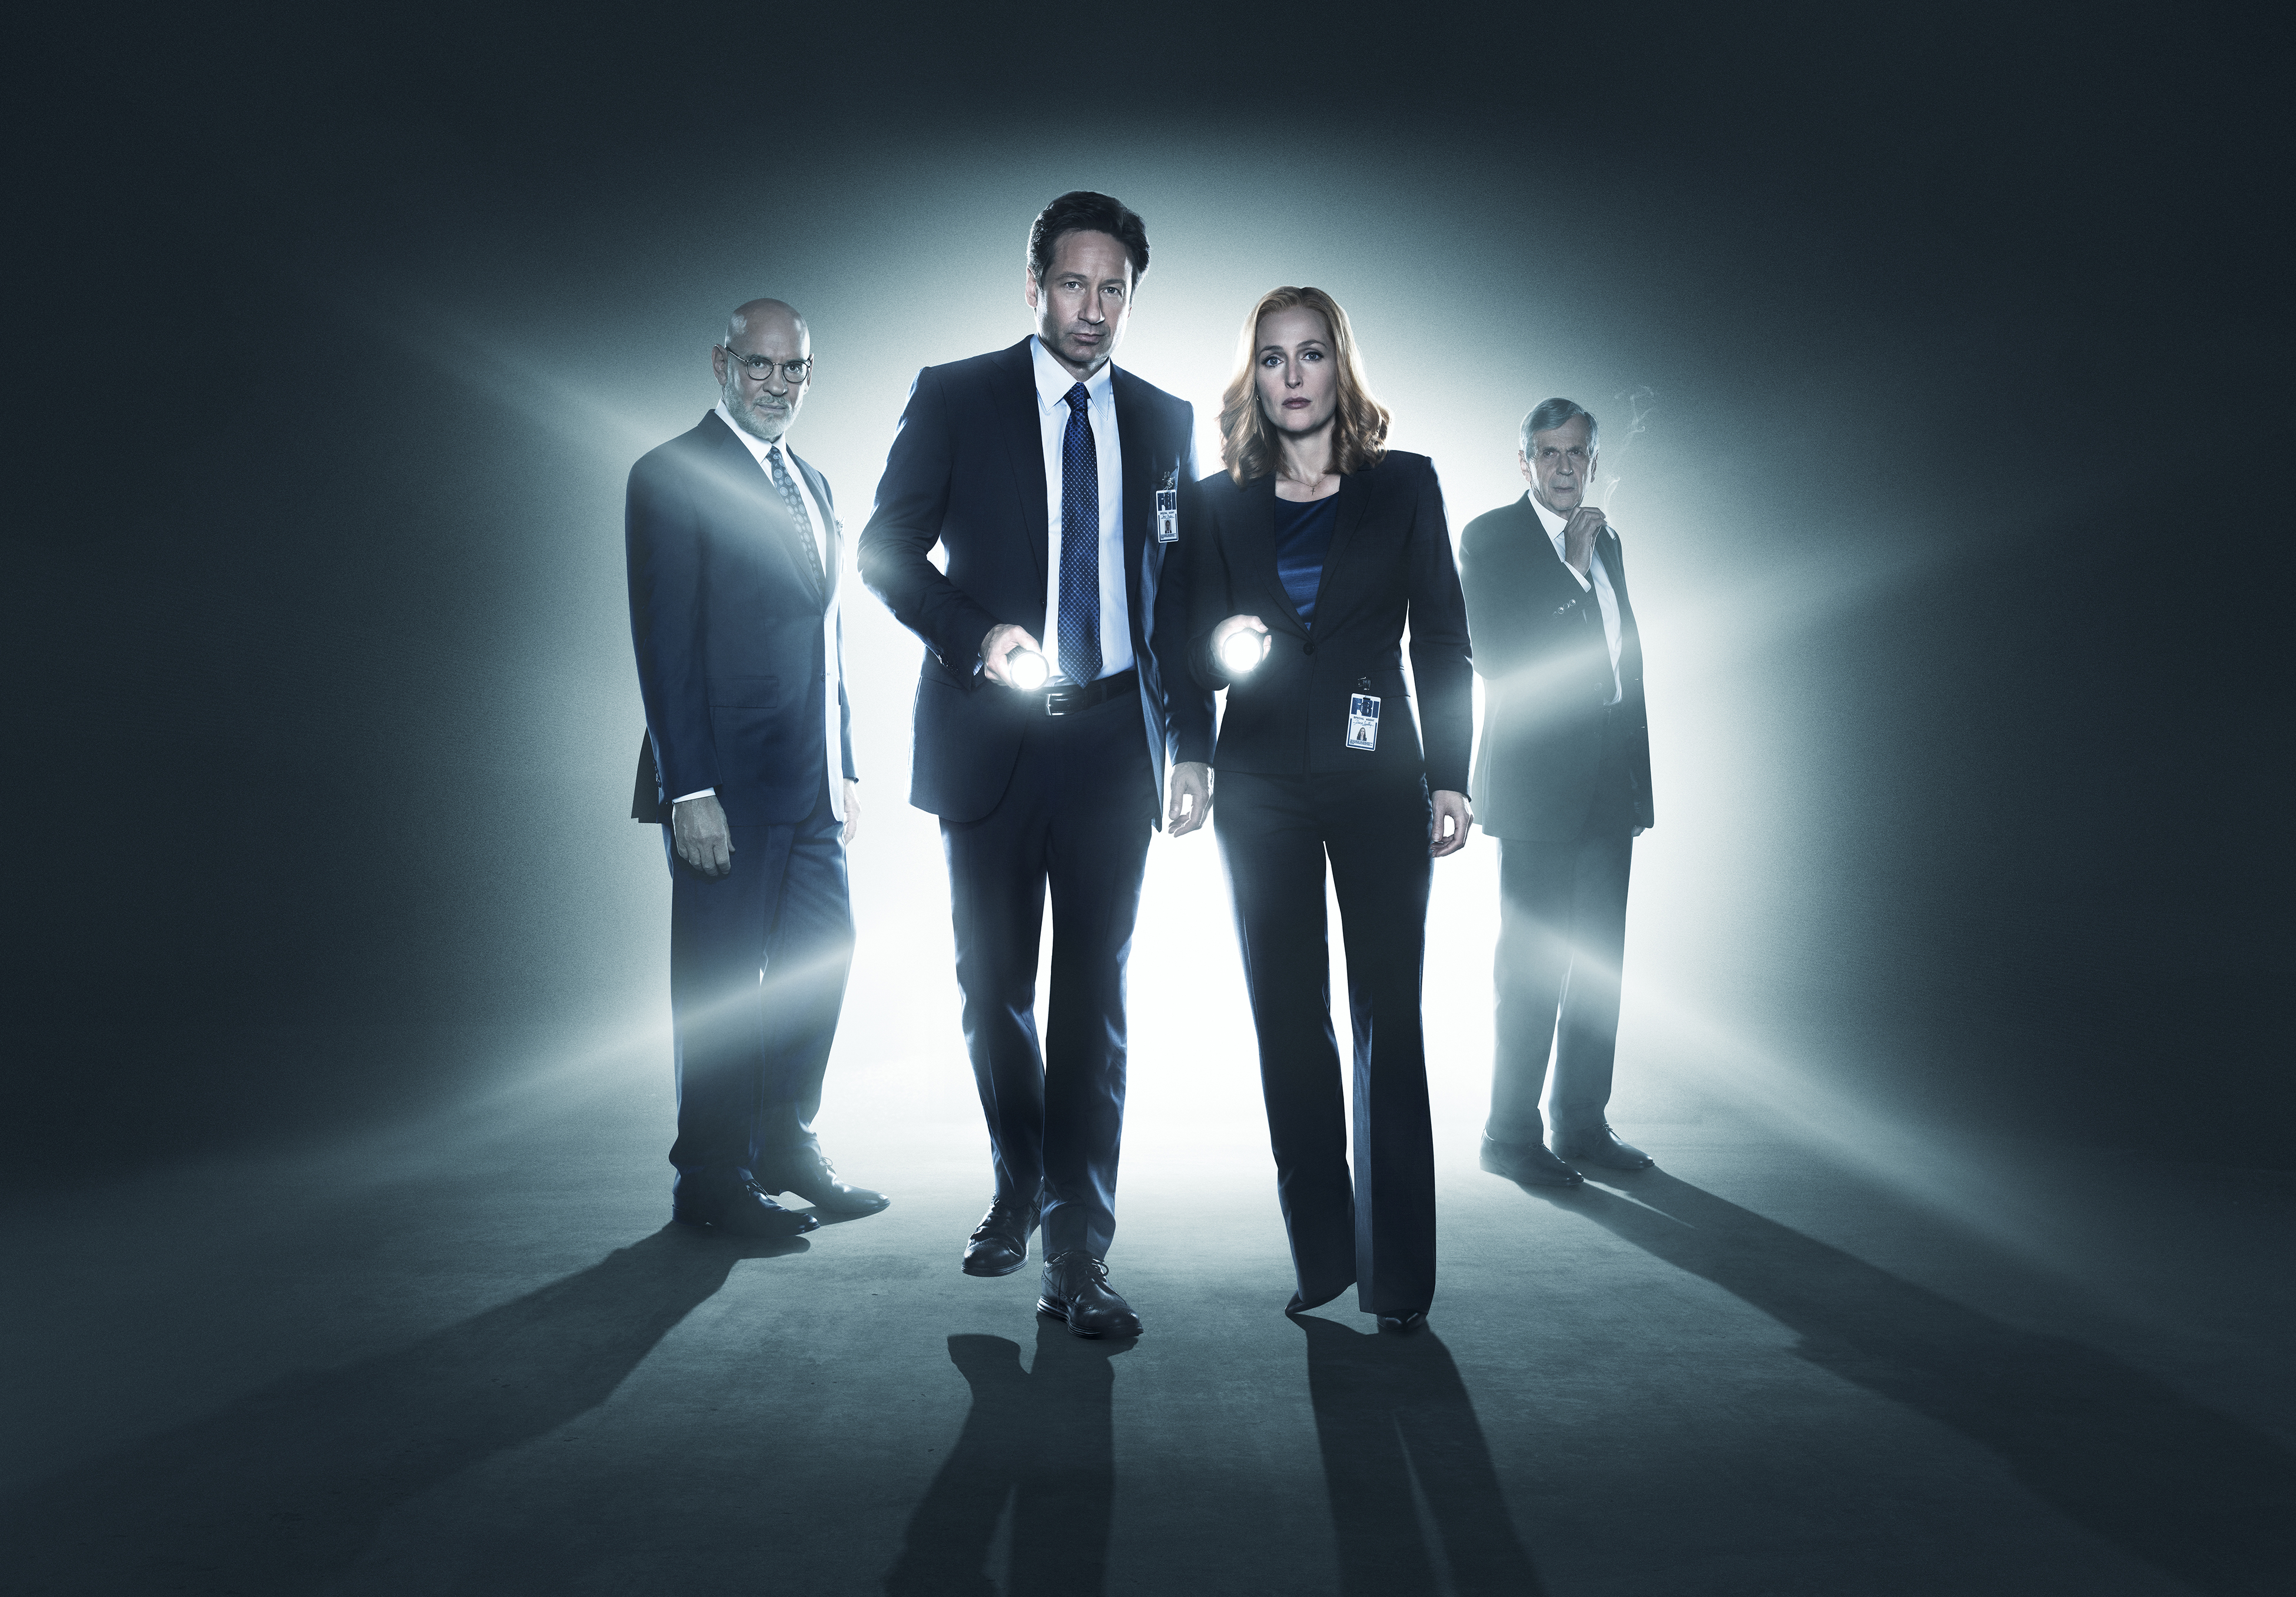 Nice Images Collection: The X-Files Desktop Wallpapers